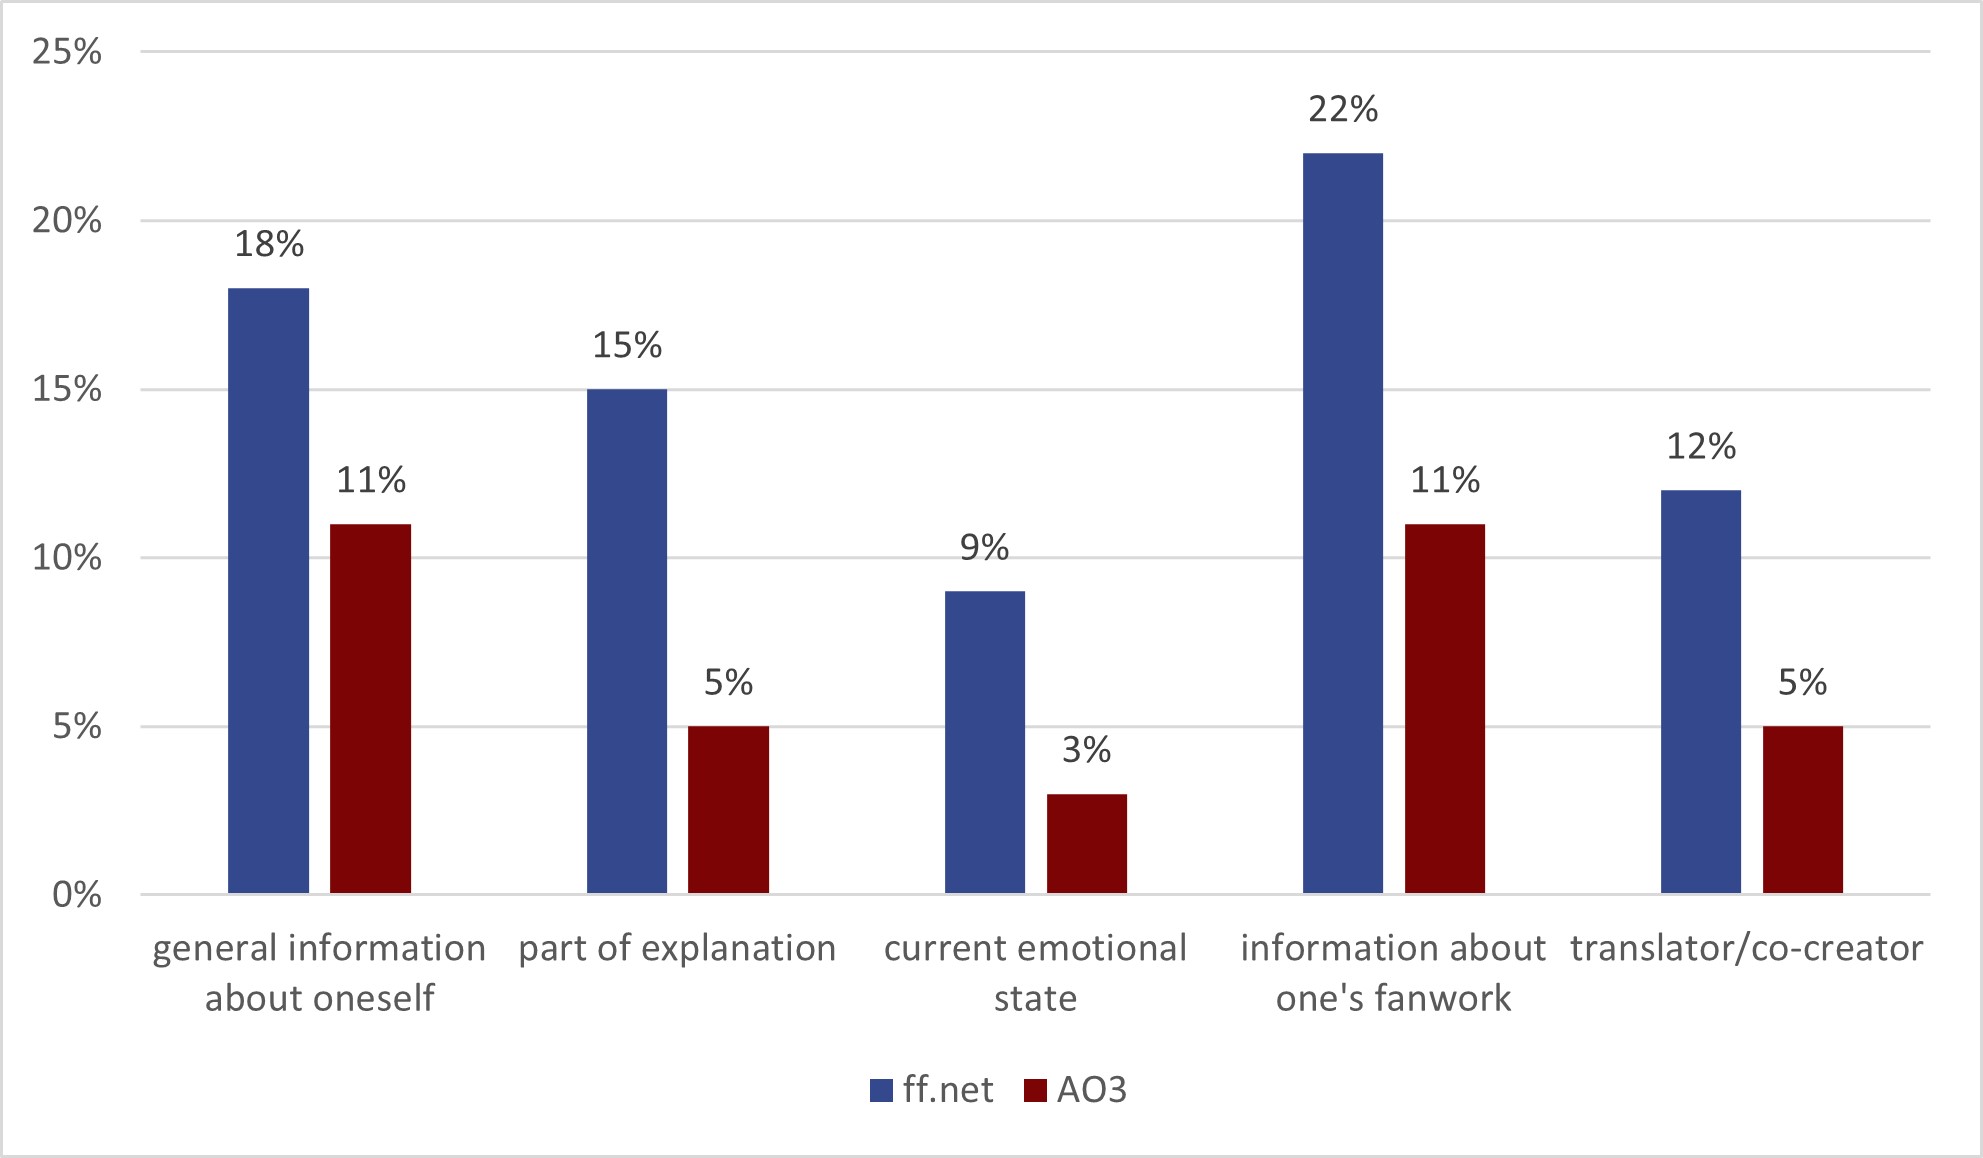 bar chart comparing AO3 and FanFiction.net